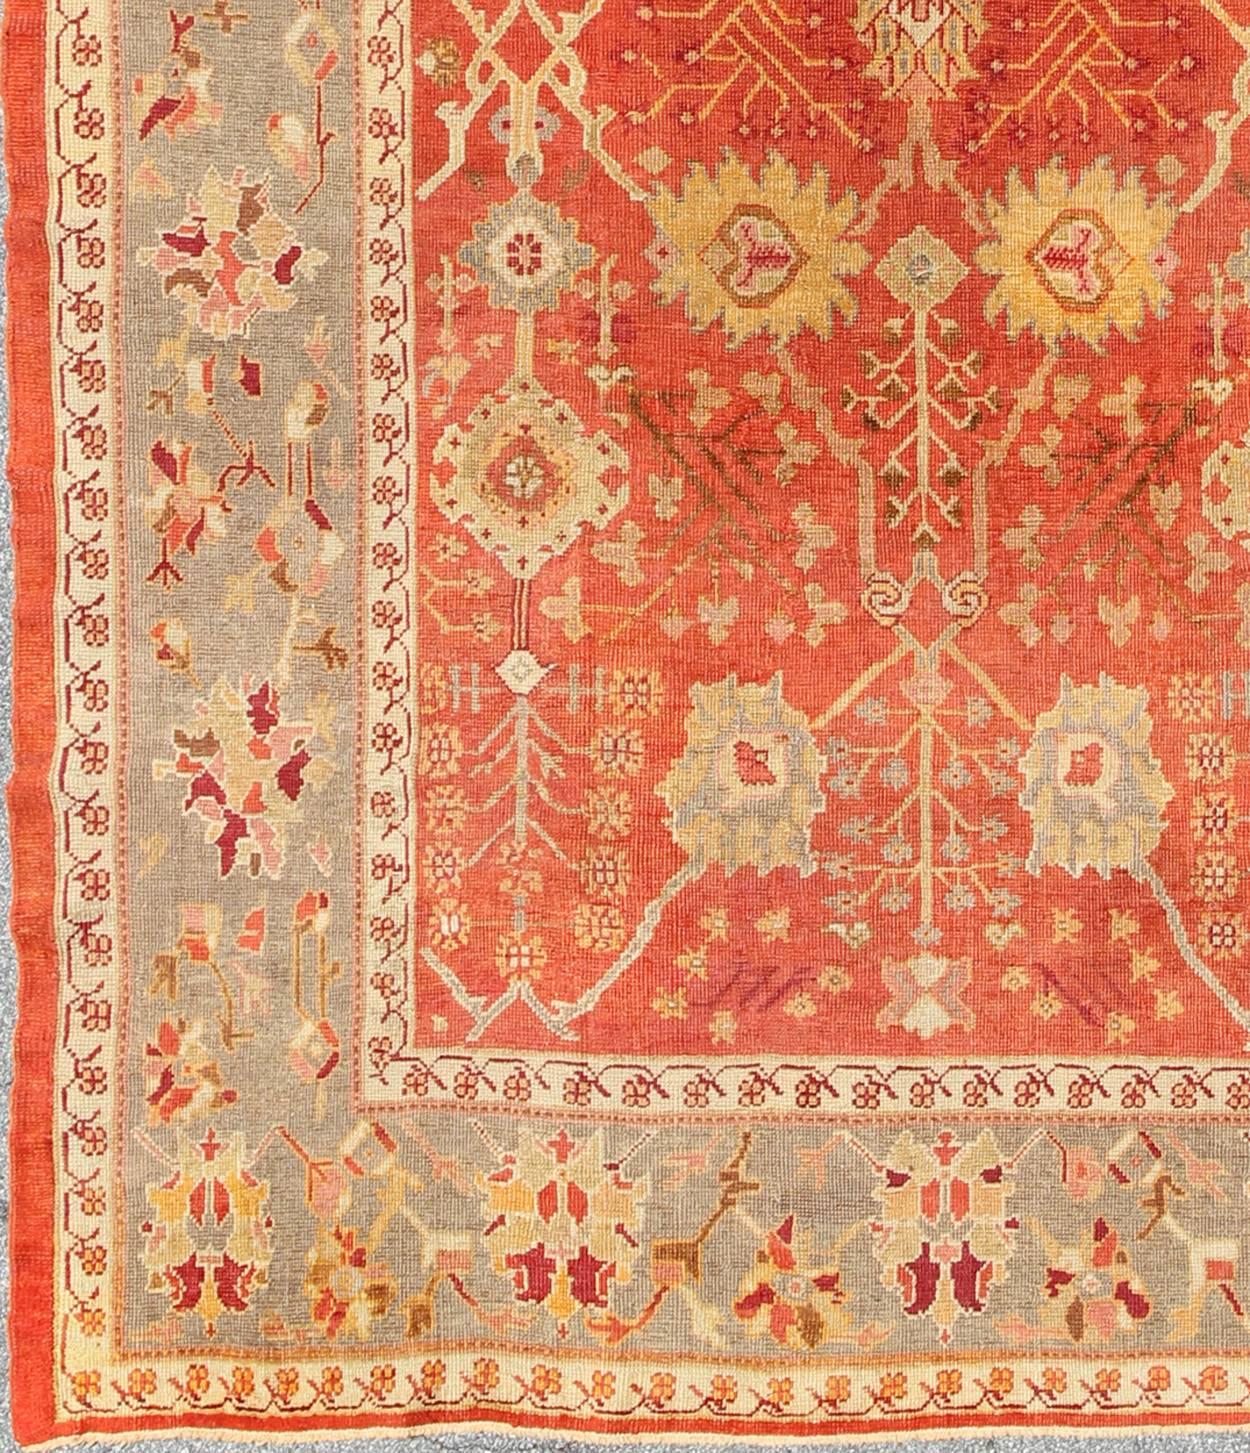 Antique Turkish Oushak Rug With All-Over Design. Keivan Woven Arts; rug/ I-0601, Country of Origin: Turkey Type: Antique Oushak Design: Floral, Sub-Geometric, All-Over.

Measures: 9' 3 x 13'

This magnificent antique Turkish Oushak displays glorious